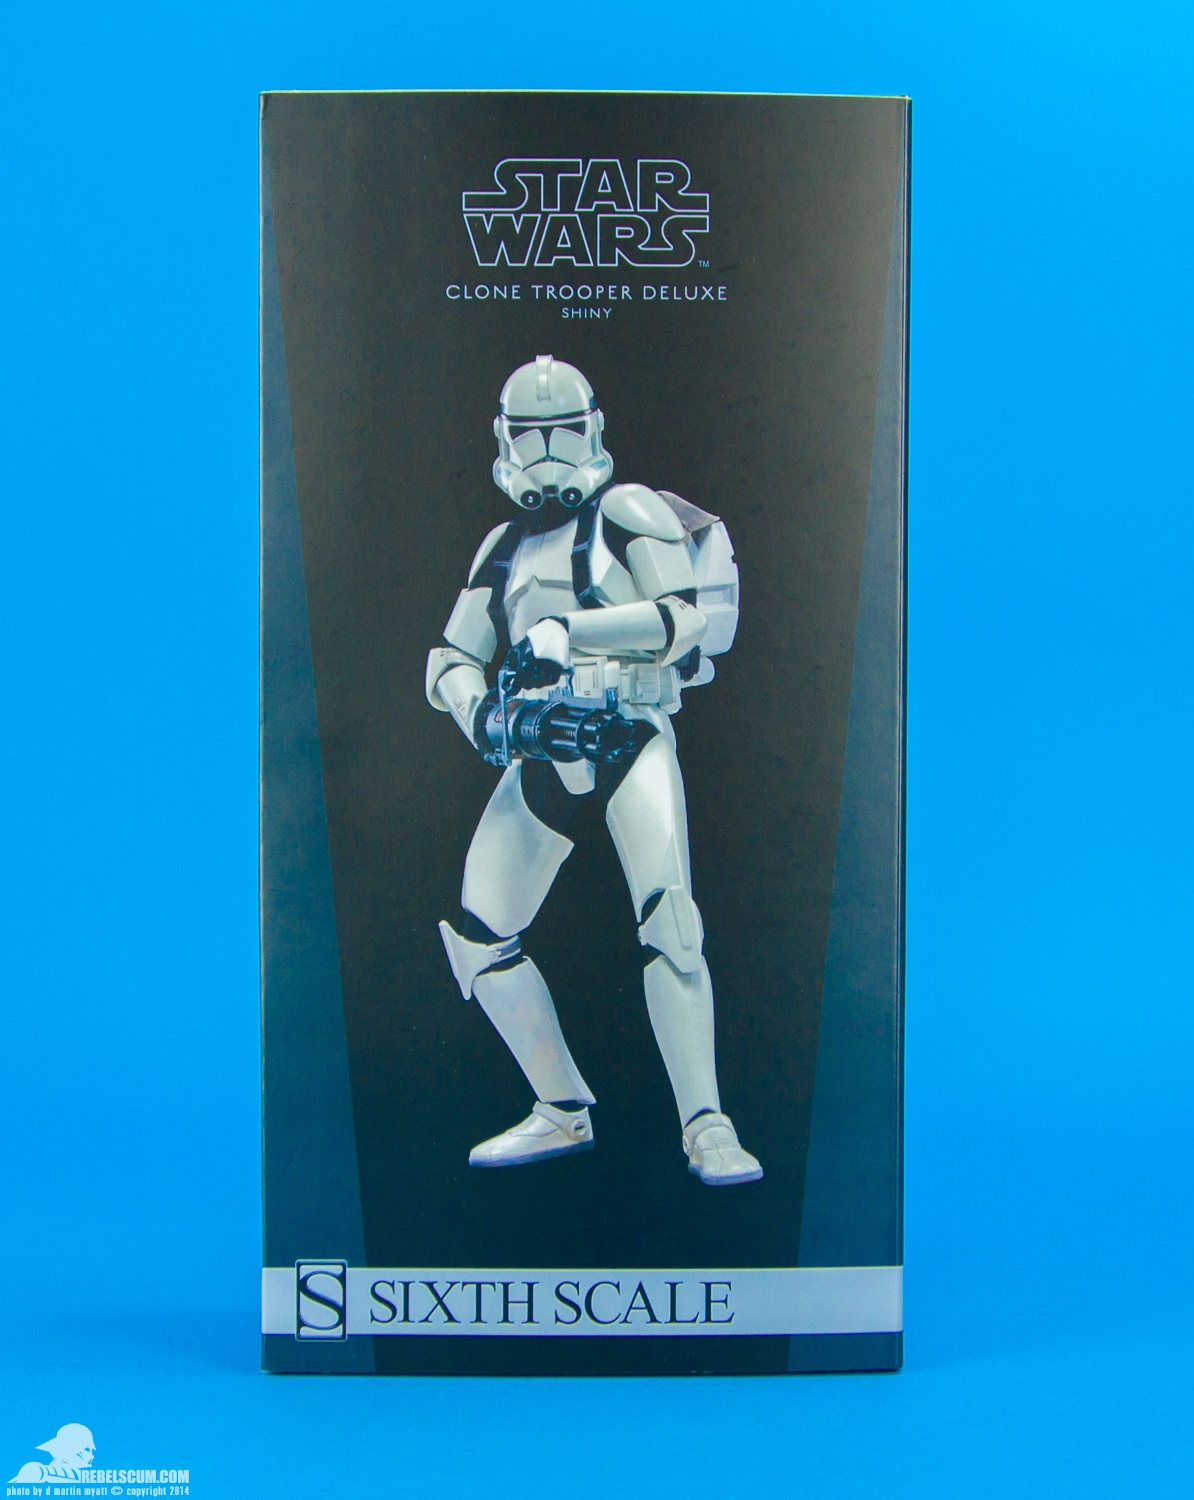 Shiny-Clone-Trooper-Deluxe-Sixth-Scale-Figure-Sideshow-023.jpg